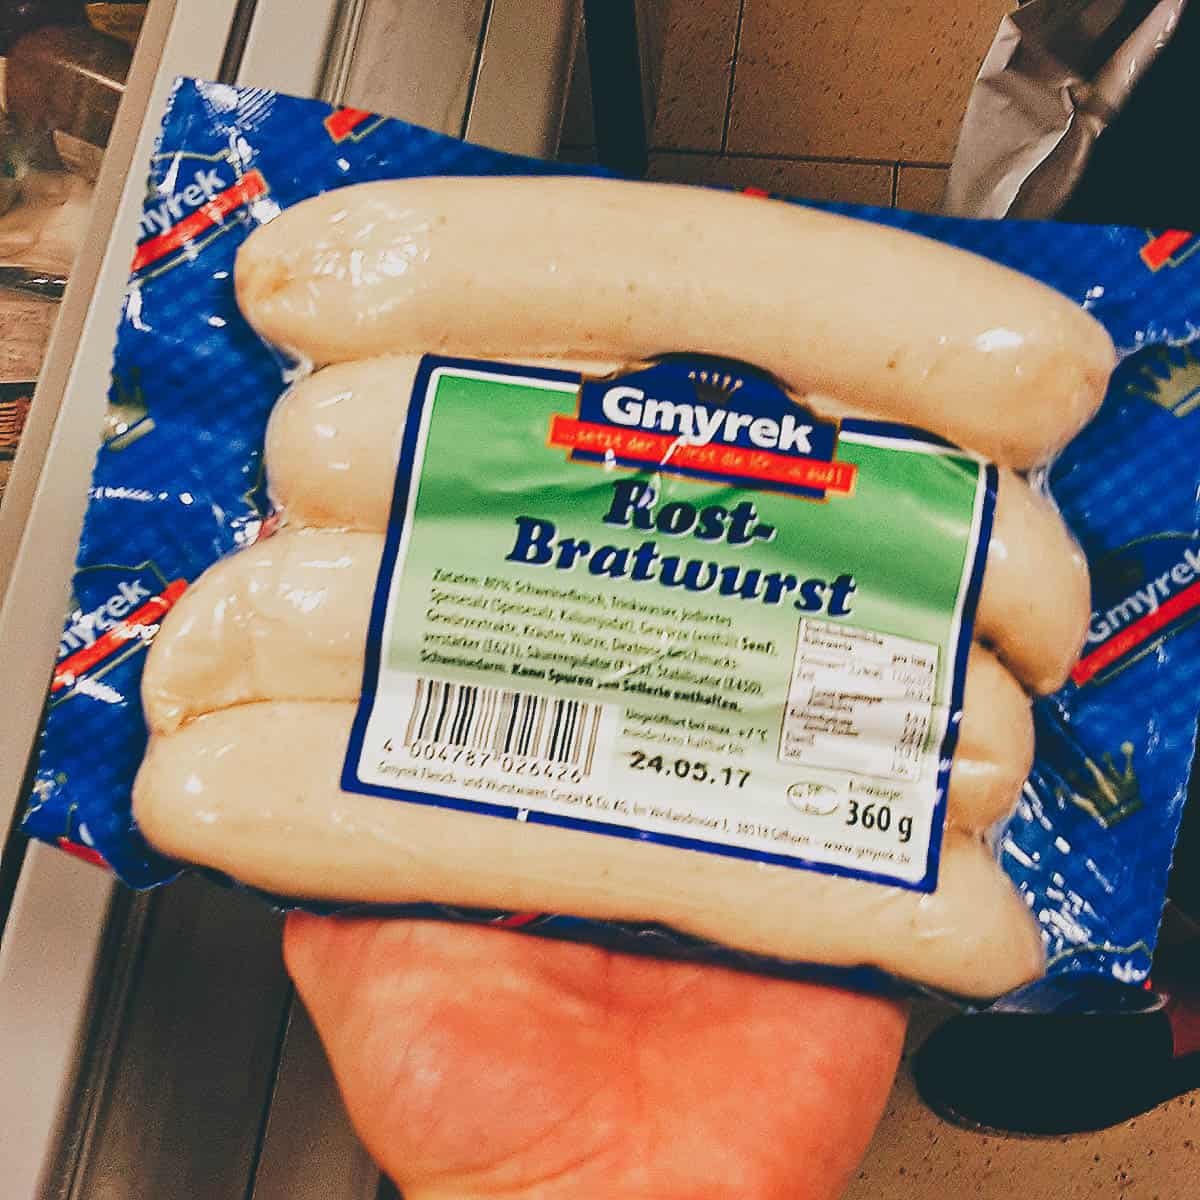 National Dish Quest: The German Bratwurst - A Typical German Dish